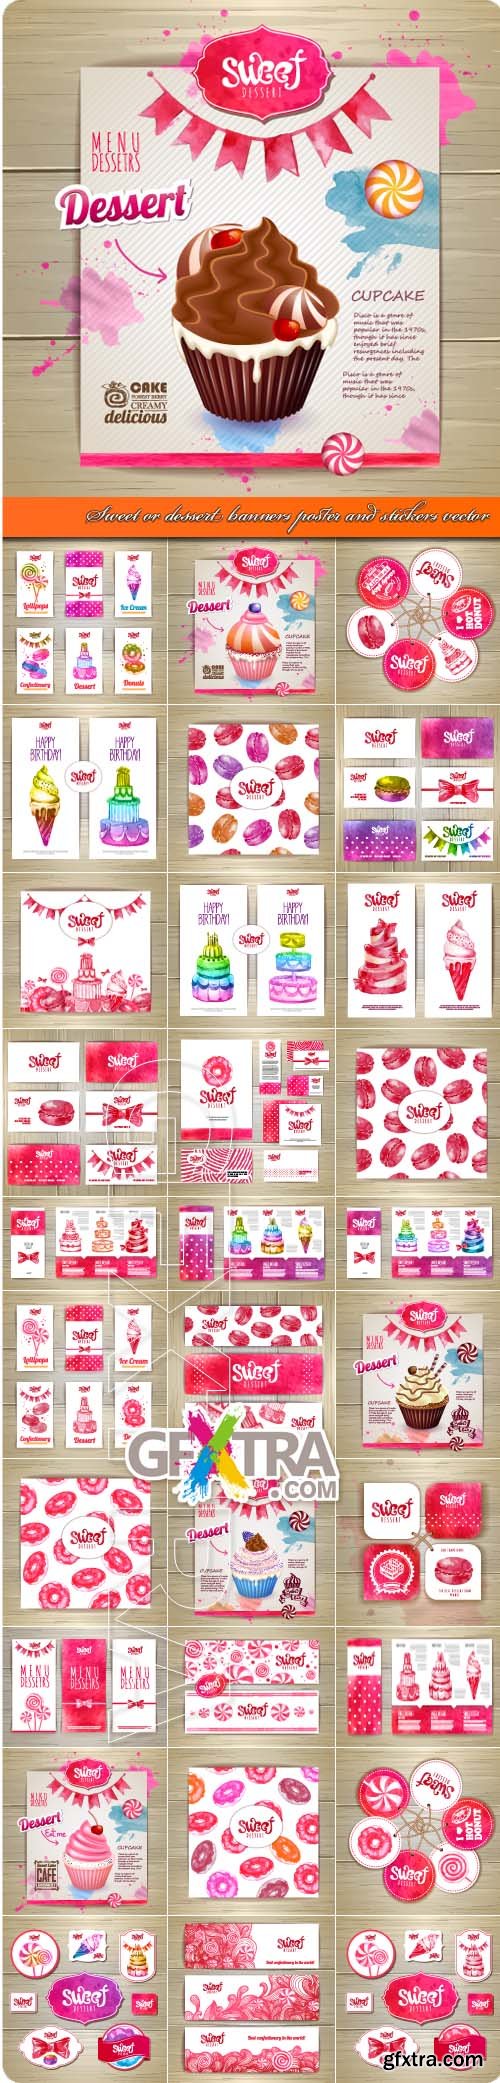 Sweet or dessert banners poster and stickers vector